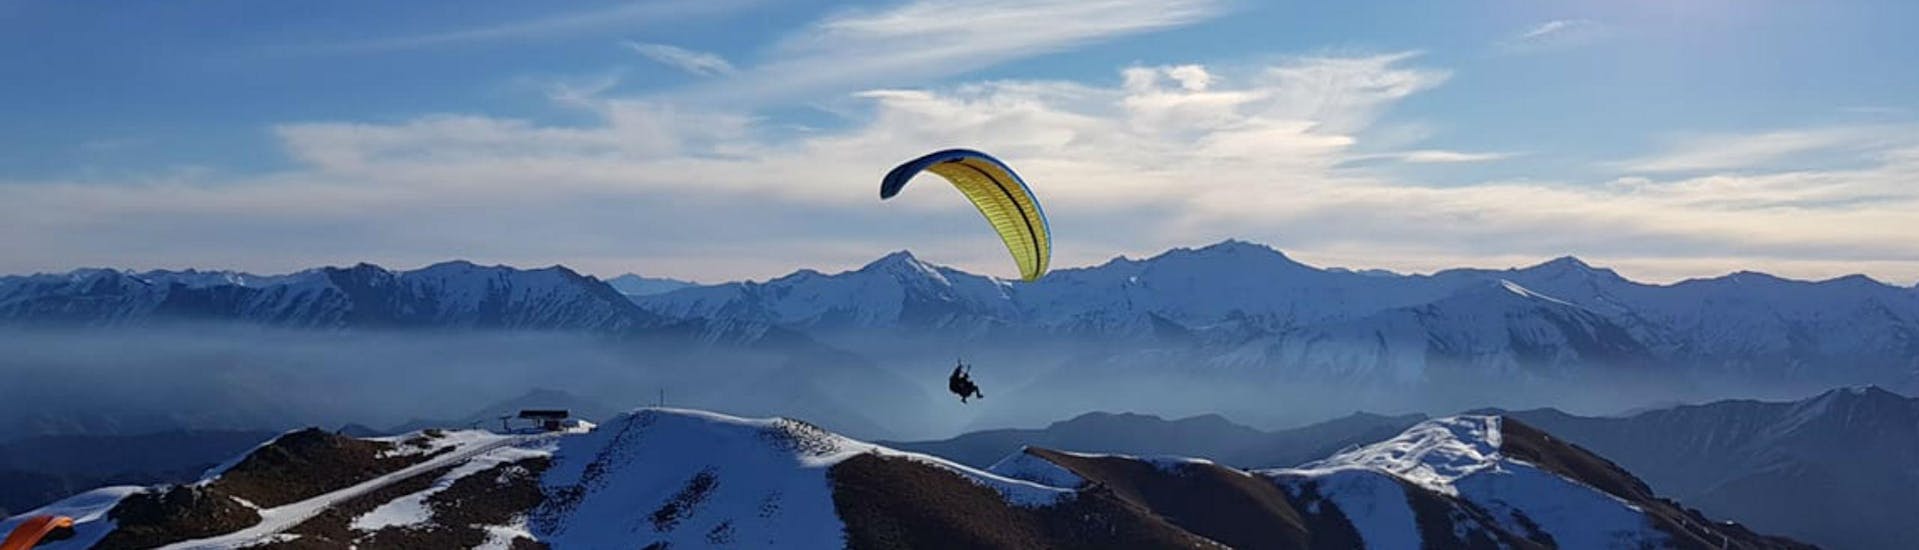 A paraglider from Skytrek Queenstown is flying over snow-capped mountains while Paragliding in Queenstown - Winter.